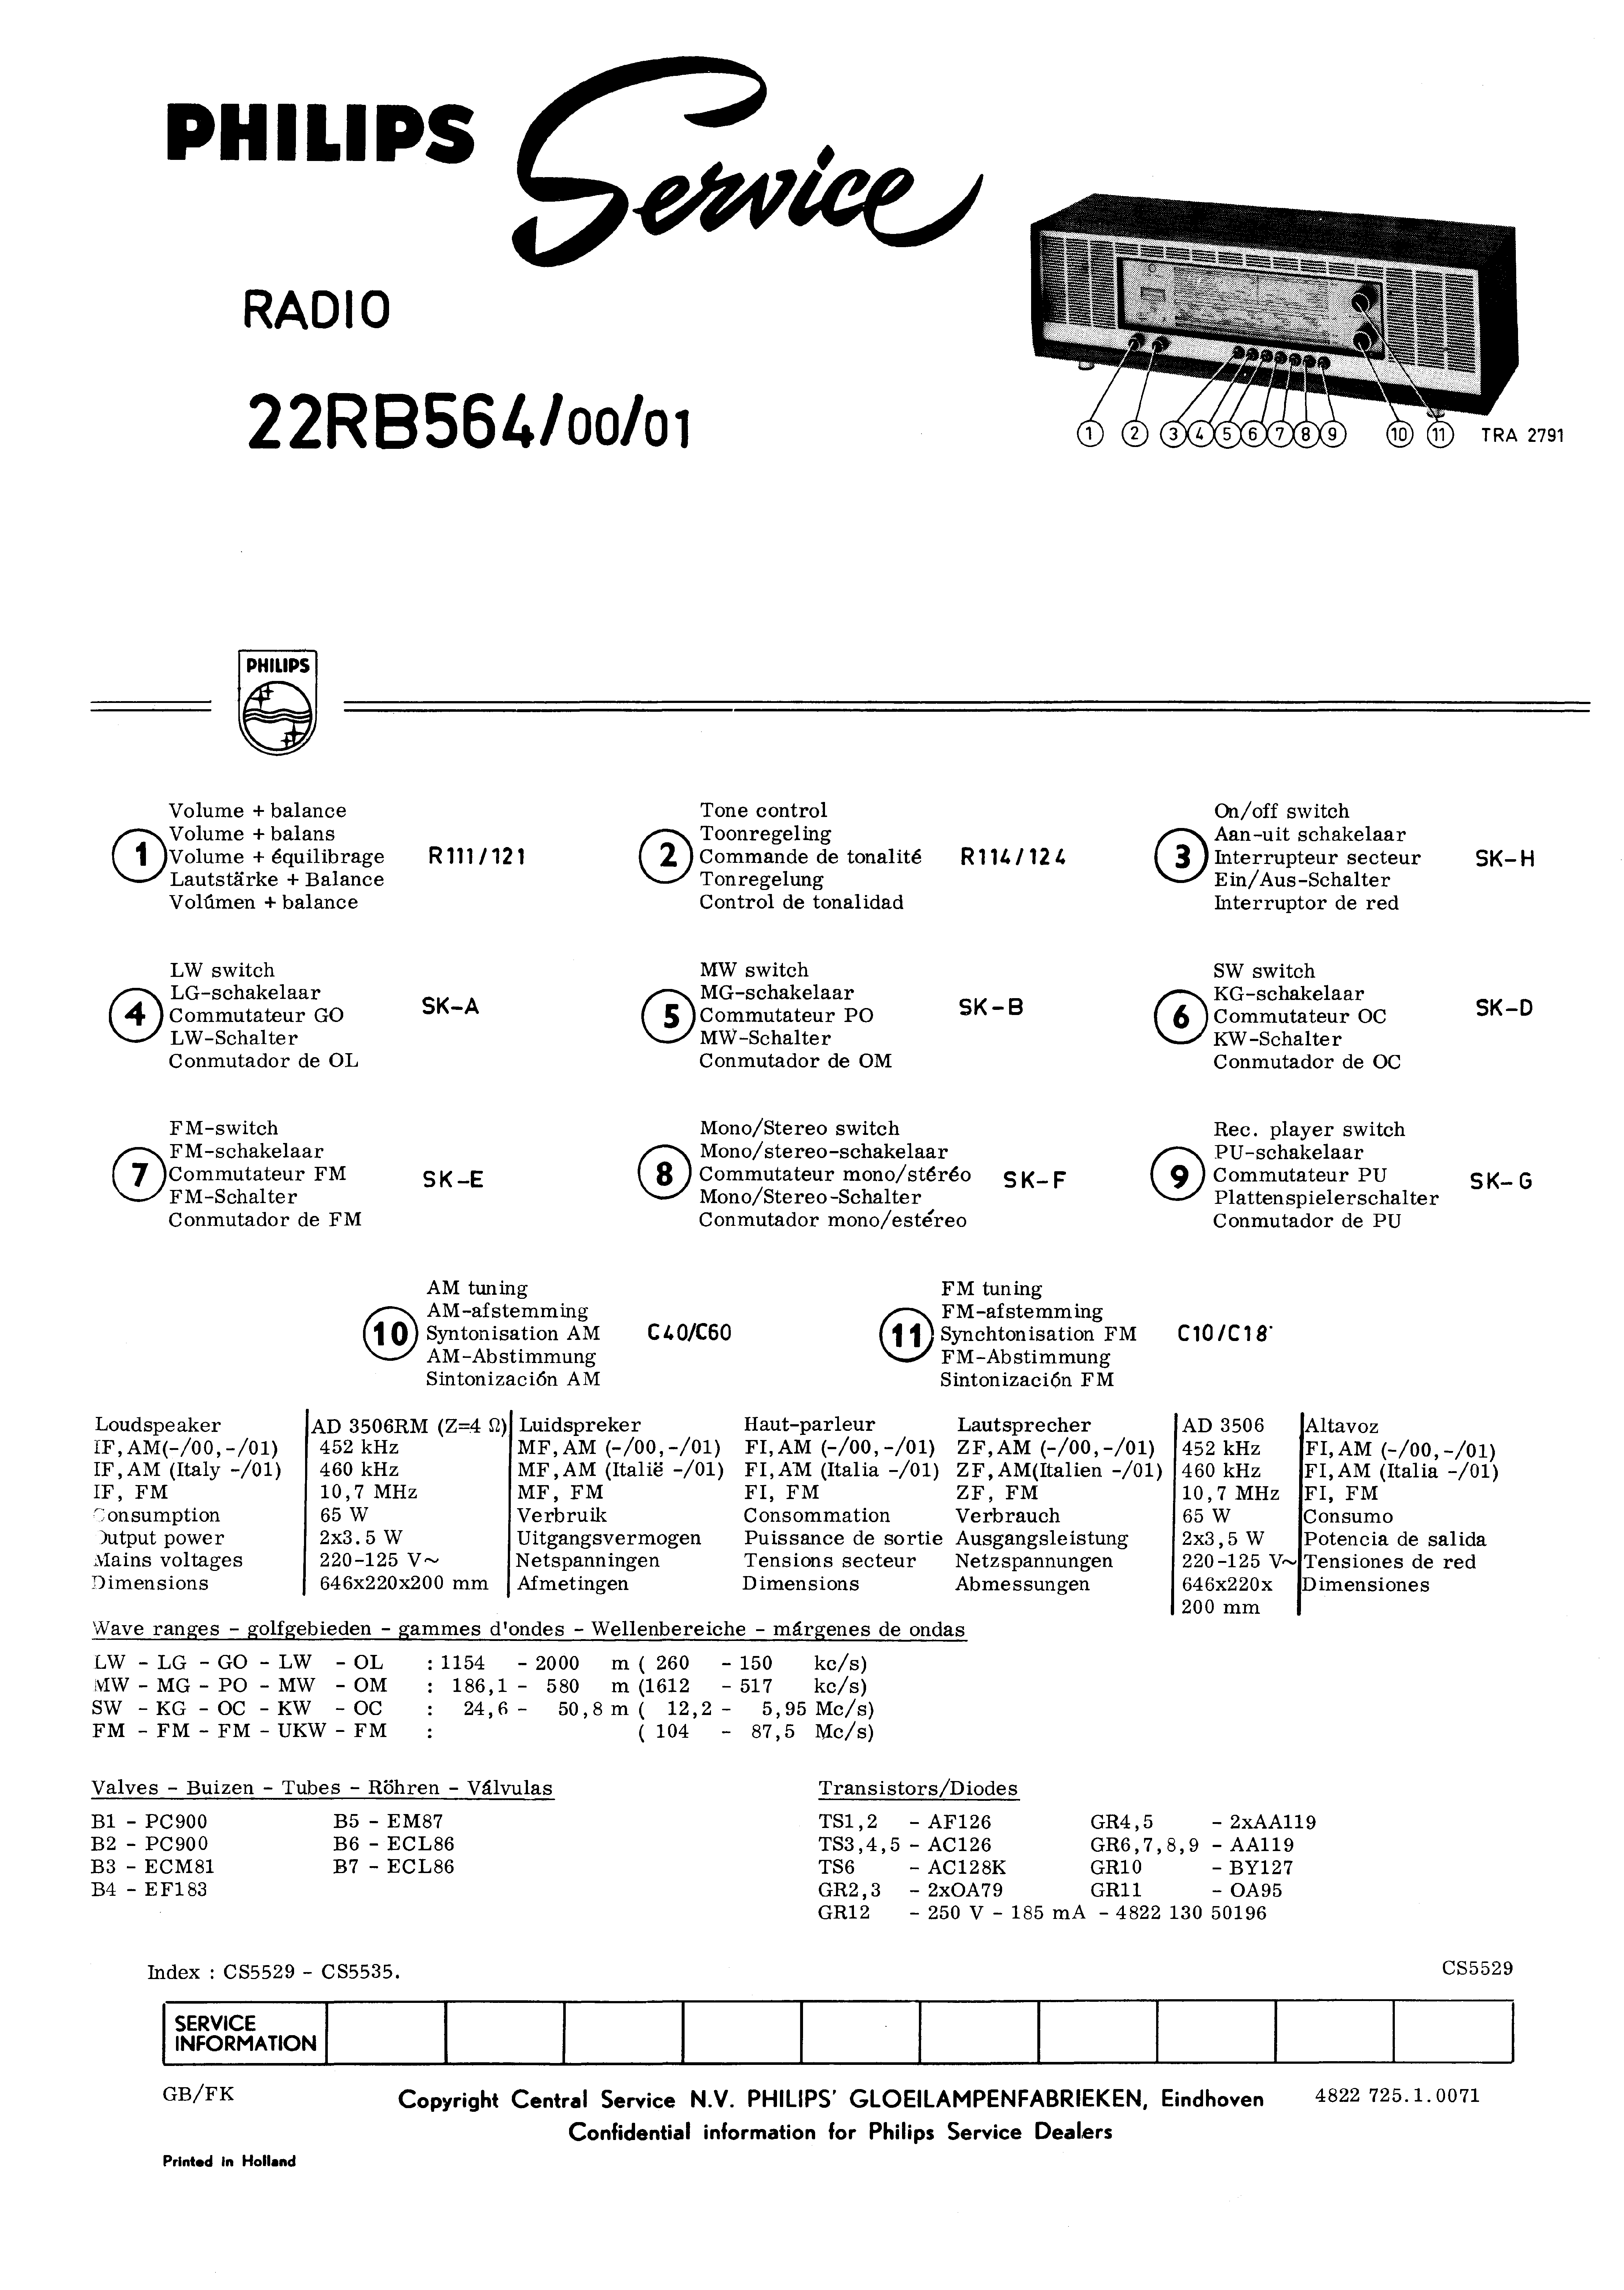 PHILIPS RADIO 22RB564 SM service manual (1st page)